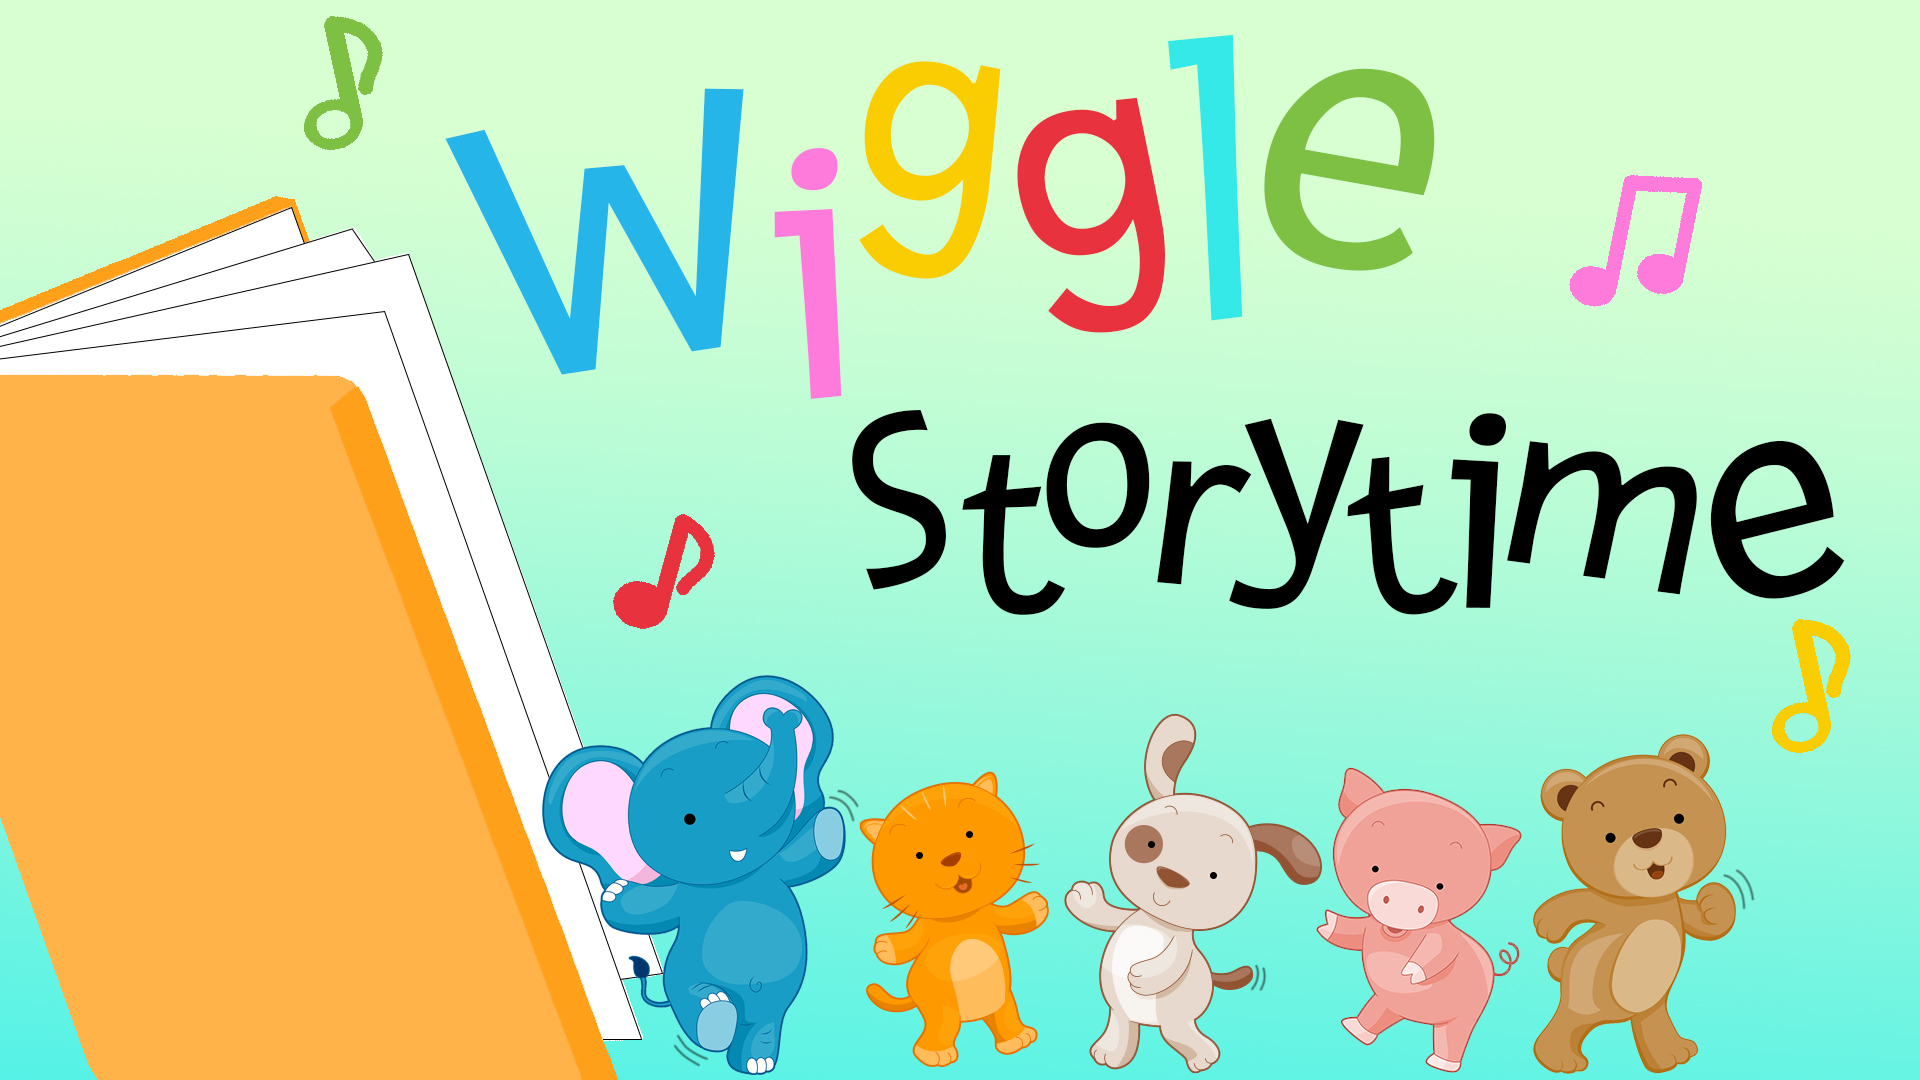 Image reads "Wiggle Storytime" on a blue to green gradient background. There is a large orange book on the left side and dancing animals along the bottom. There are random colorful music notes scattered in the background. 